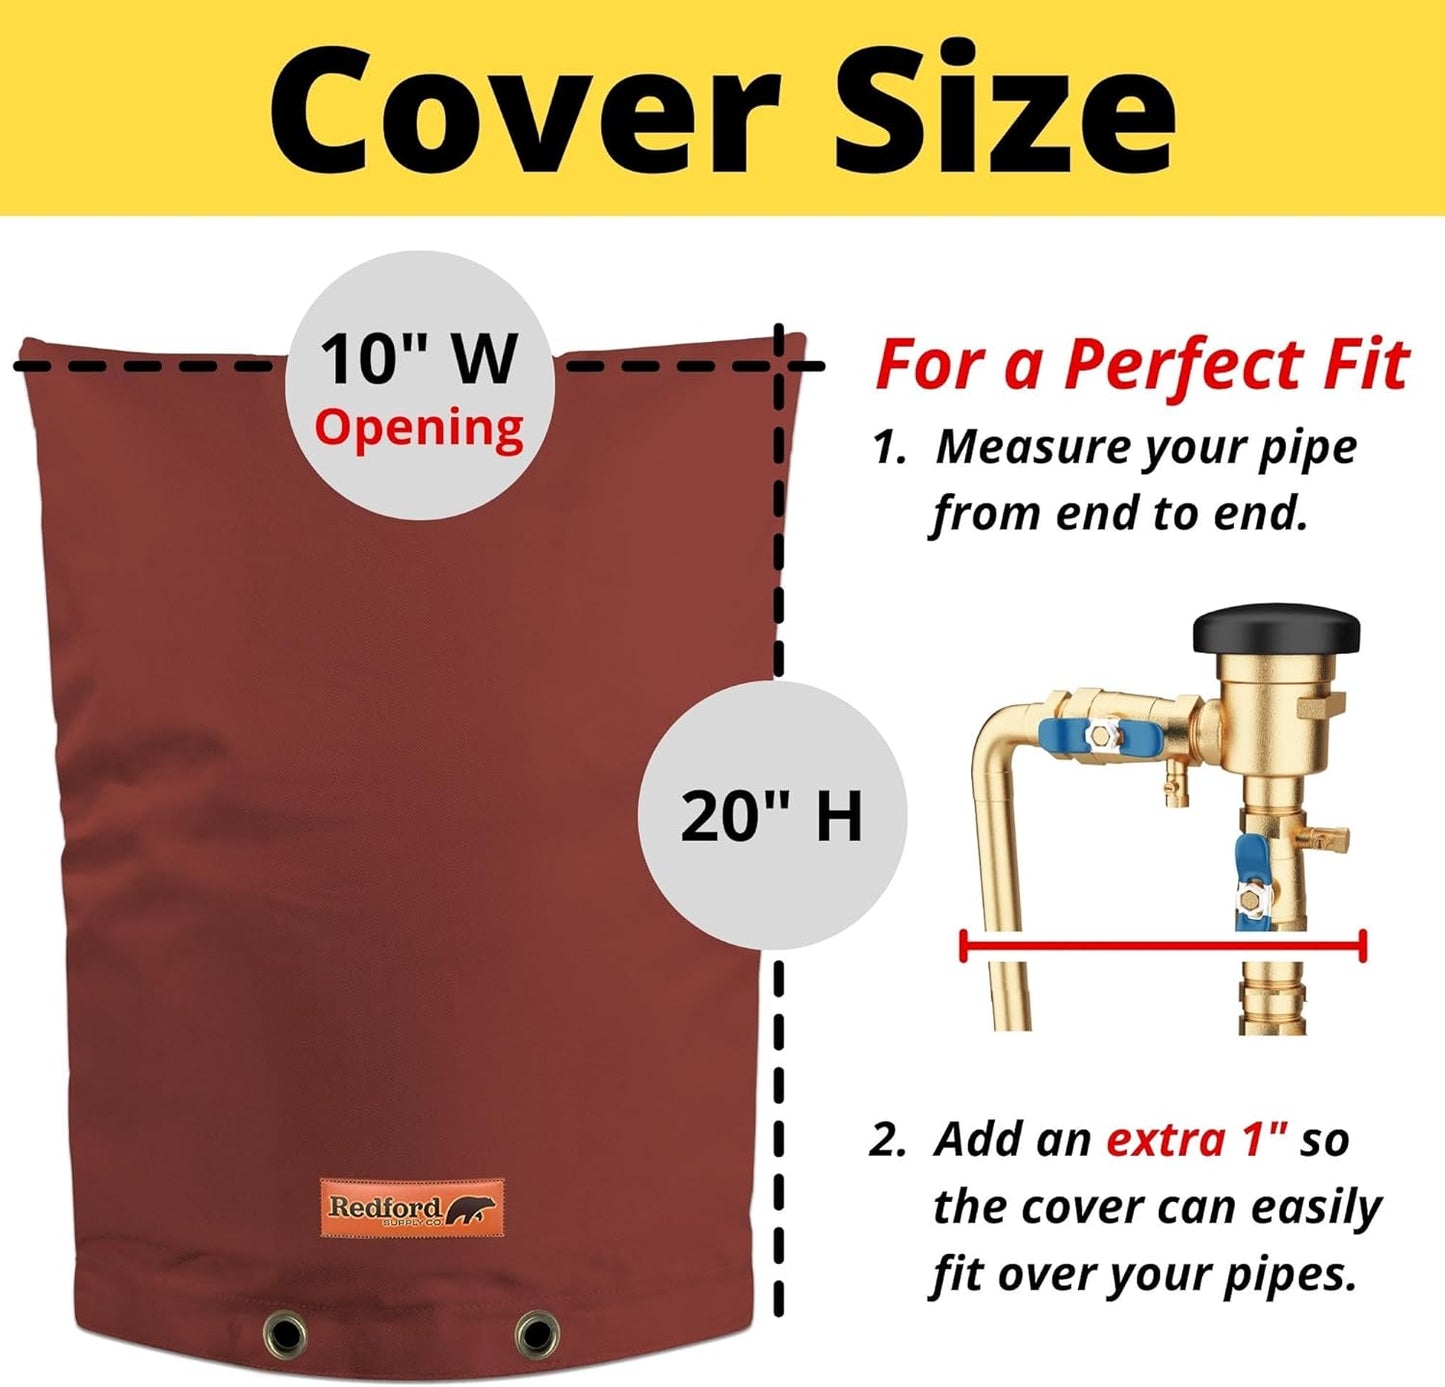 Redford Supply Co. Cold Snap (5°F) Double Wall Cotton Backflow Preventer Insulation Cover - Sprinkler Covers for Outside, Well Head Cover, Insulated Well Pump Cover, Pipe Cover (10"W x 20"H, Red)